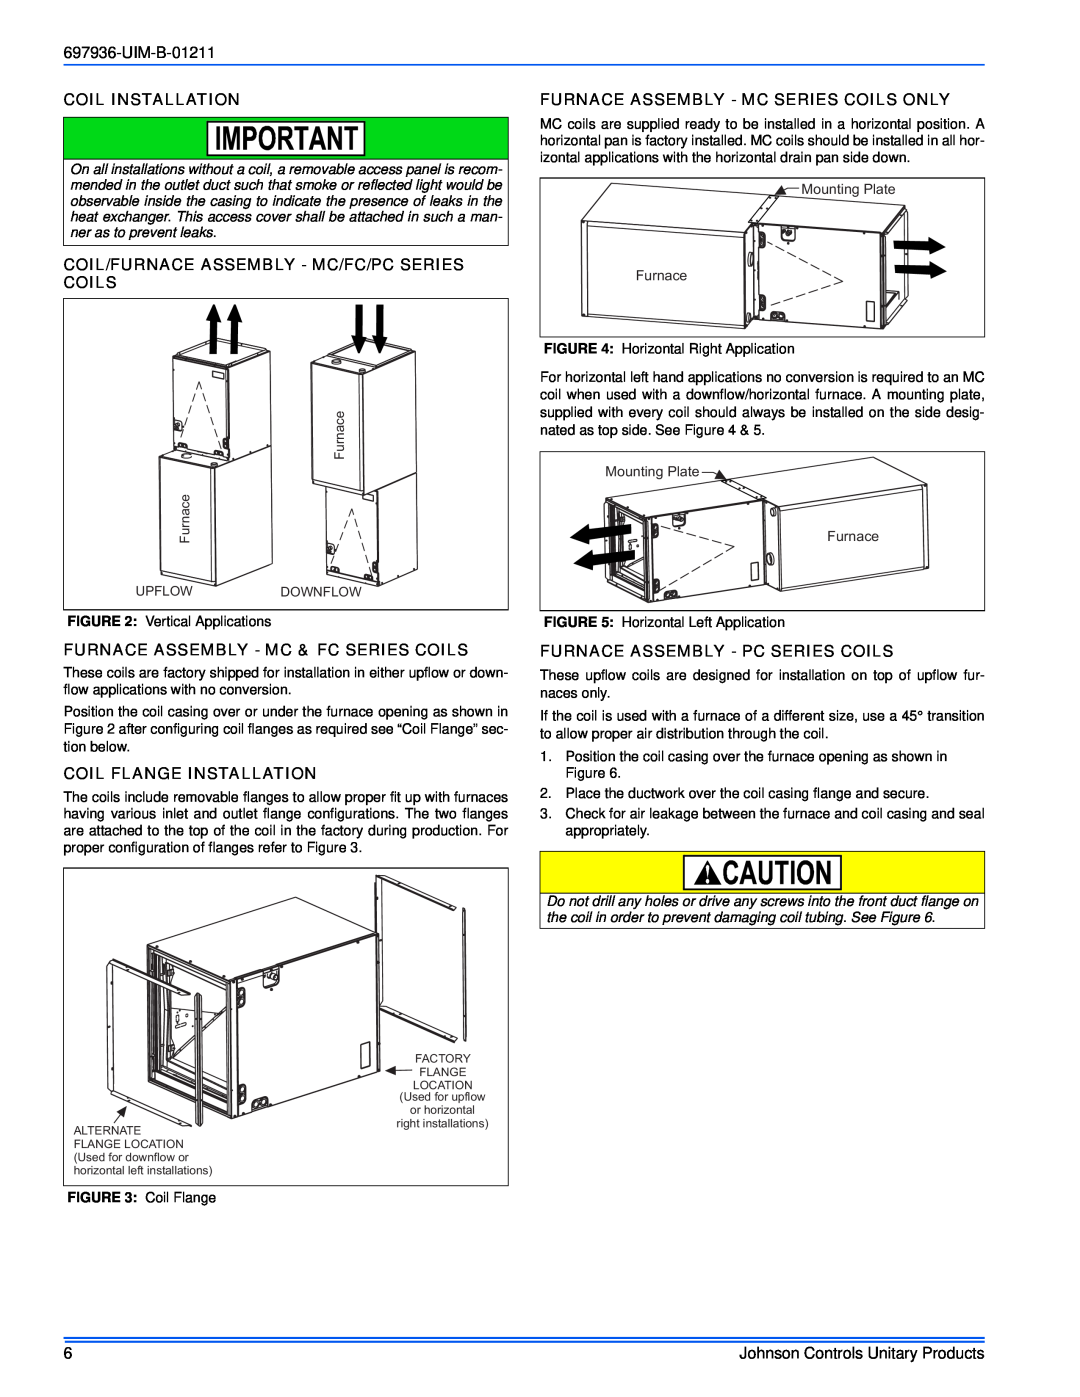 Johnson Controls TM9X*MP installation manual UIM-B-01211, Coil Installation, Coil/Furnace Assembly - Mc/Fc/Pc Series Coils 